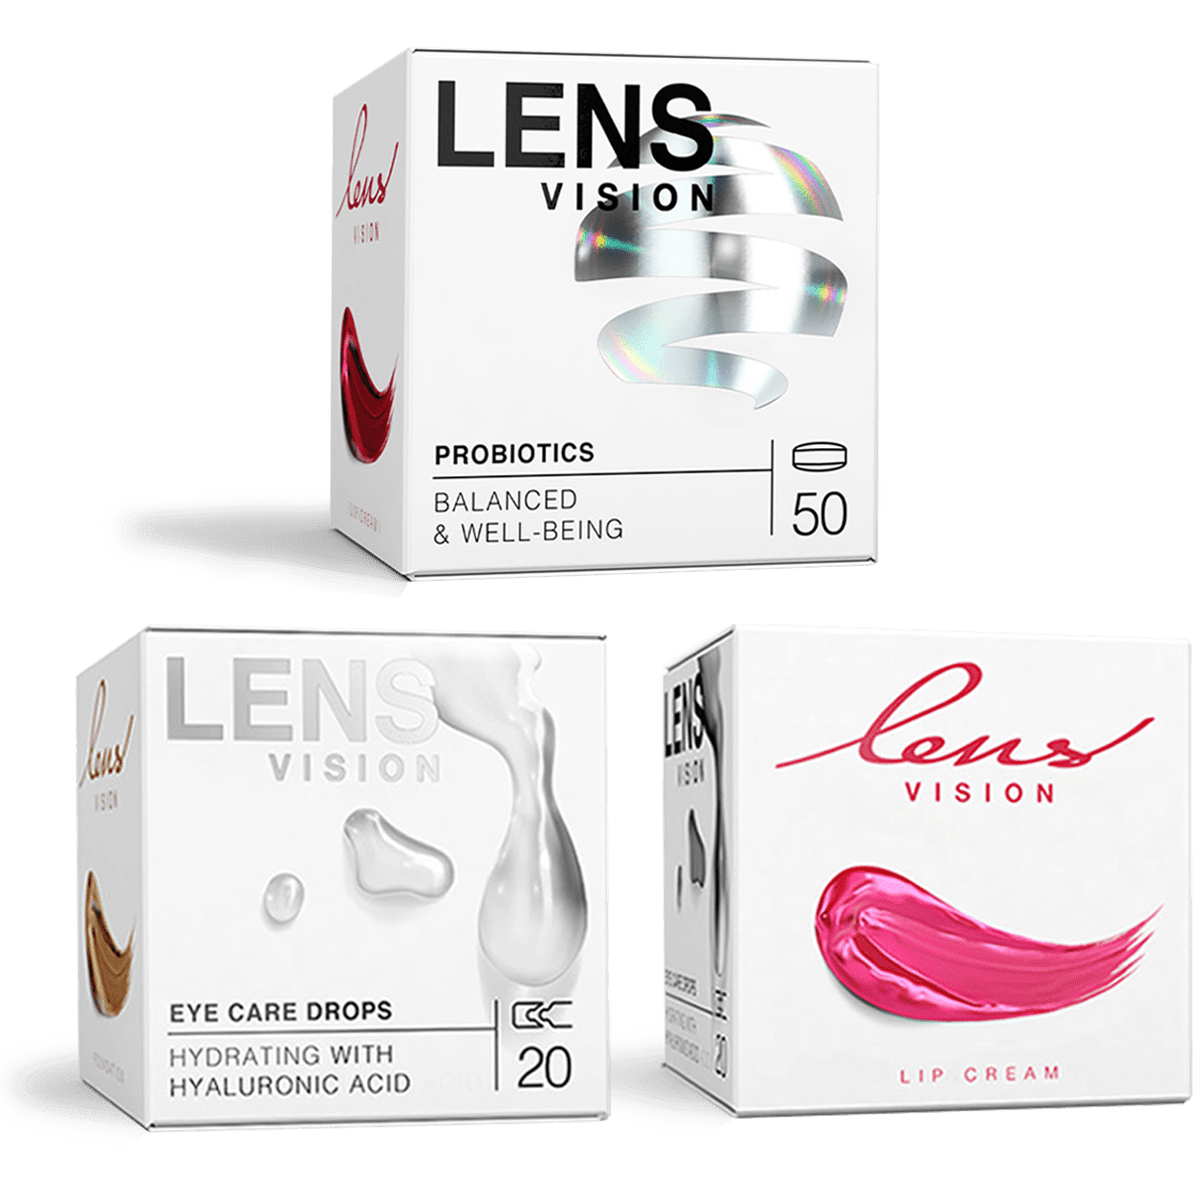 3D Lens Effects and Designs